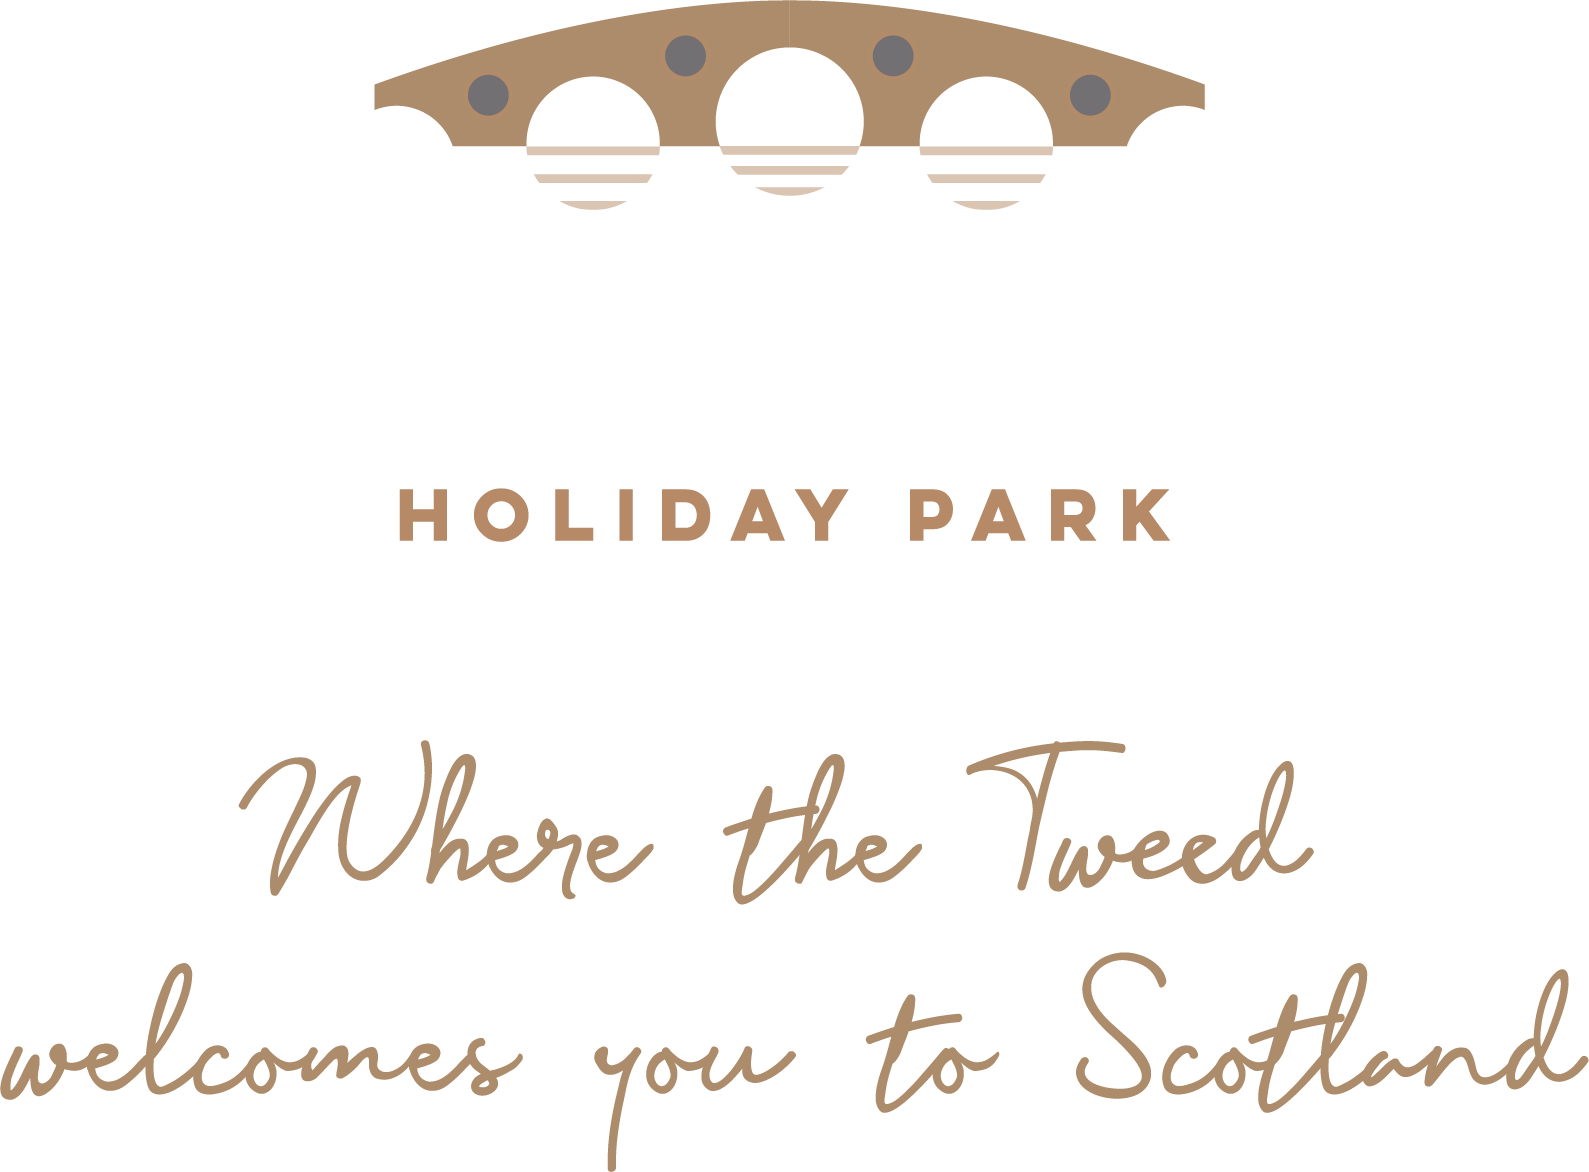 Why Choose Coldstream Holiday Park?